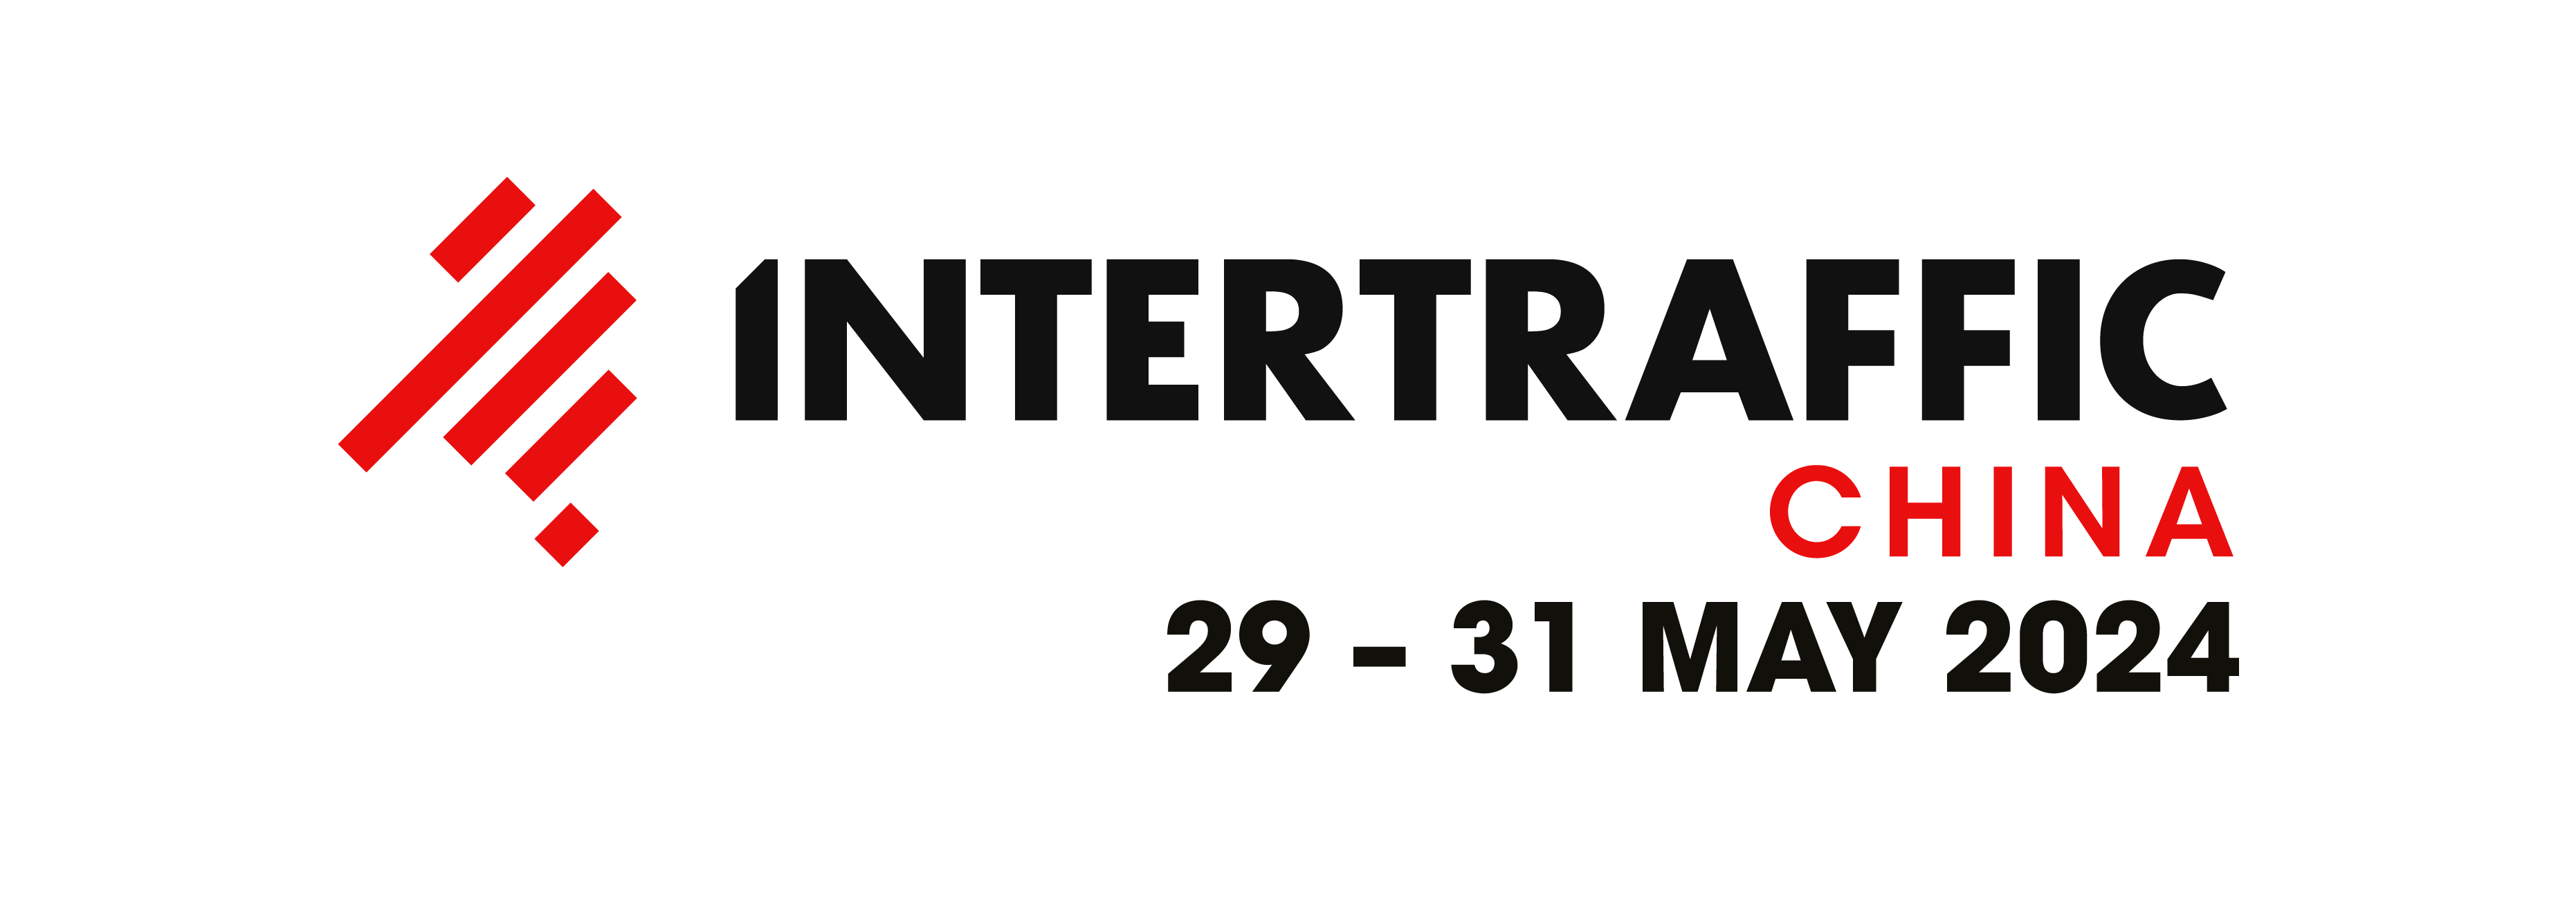 Intertraffic China 2024 with date black PNG